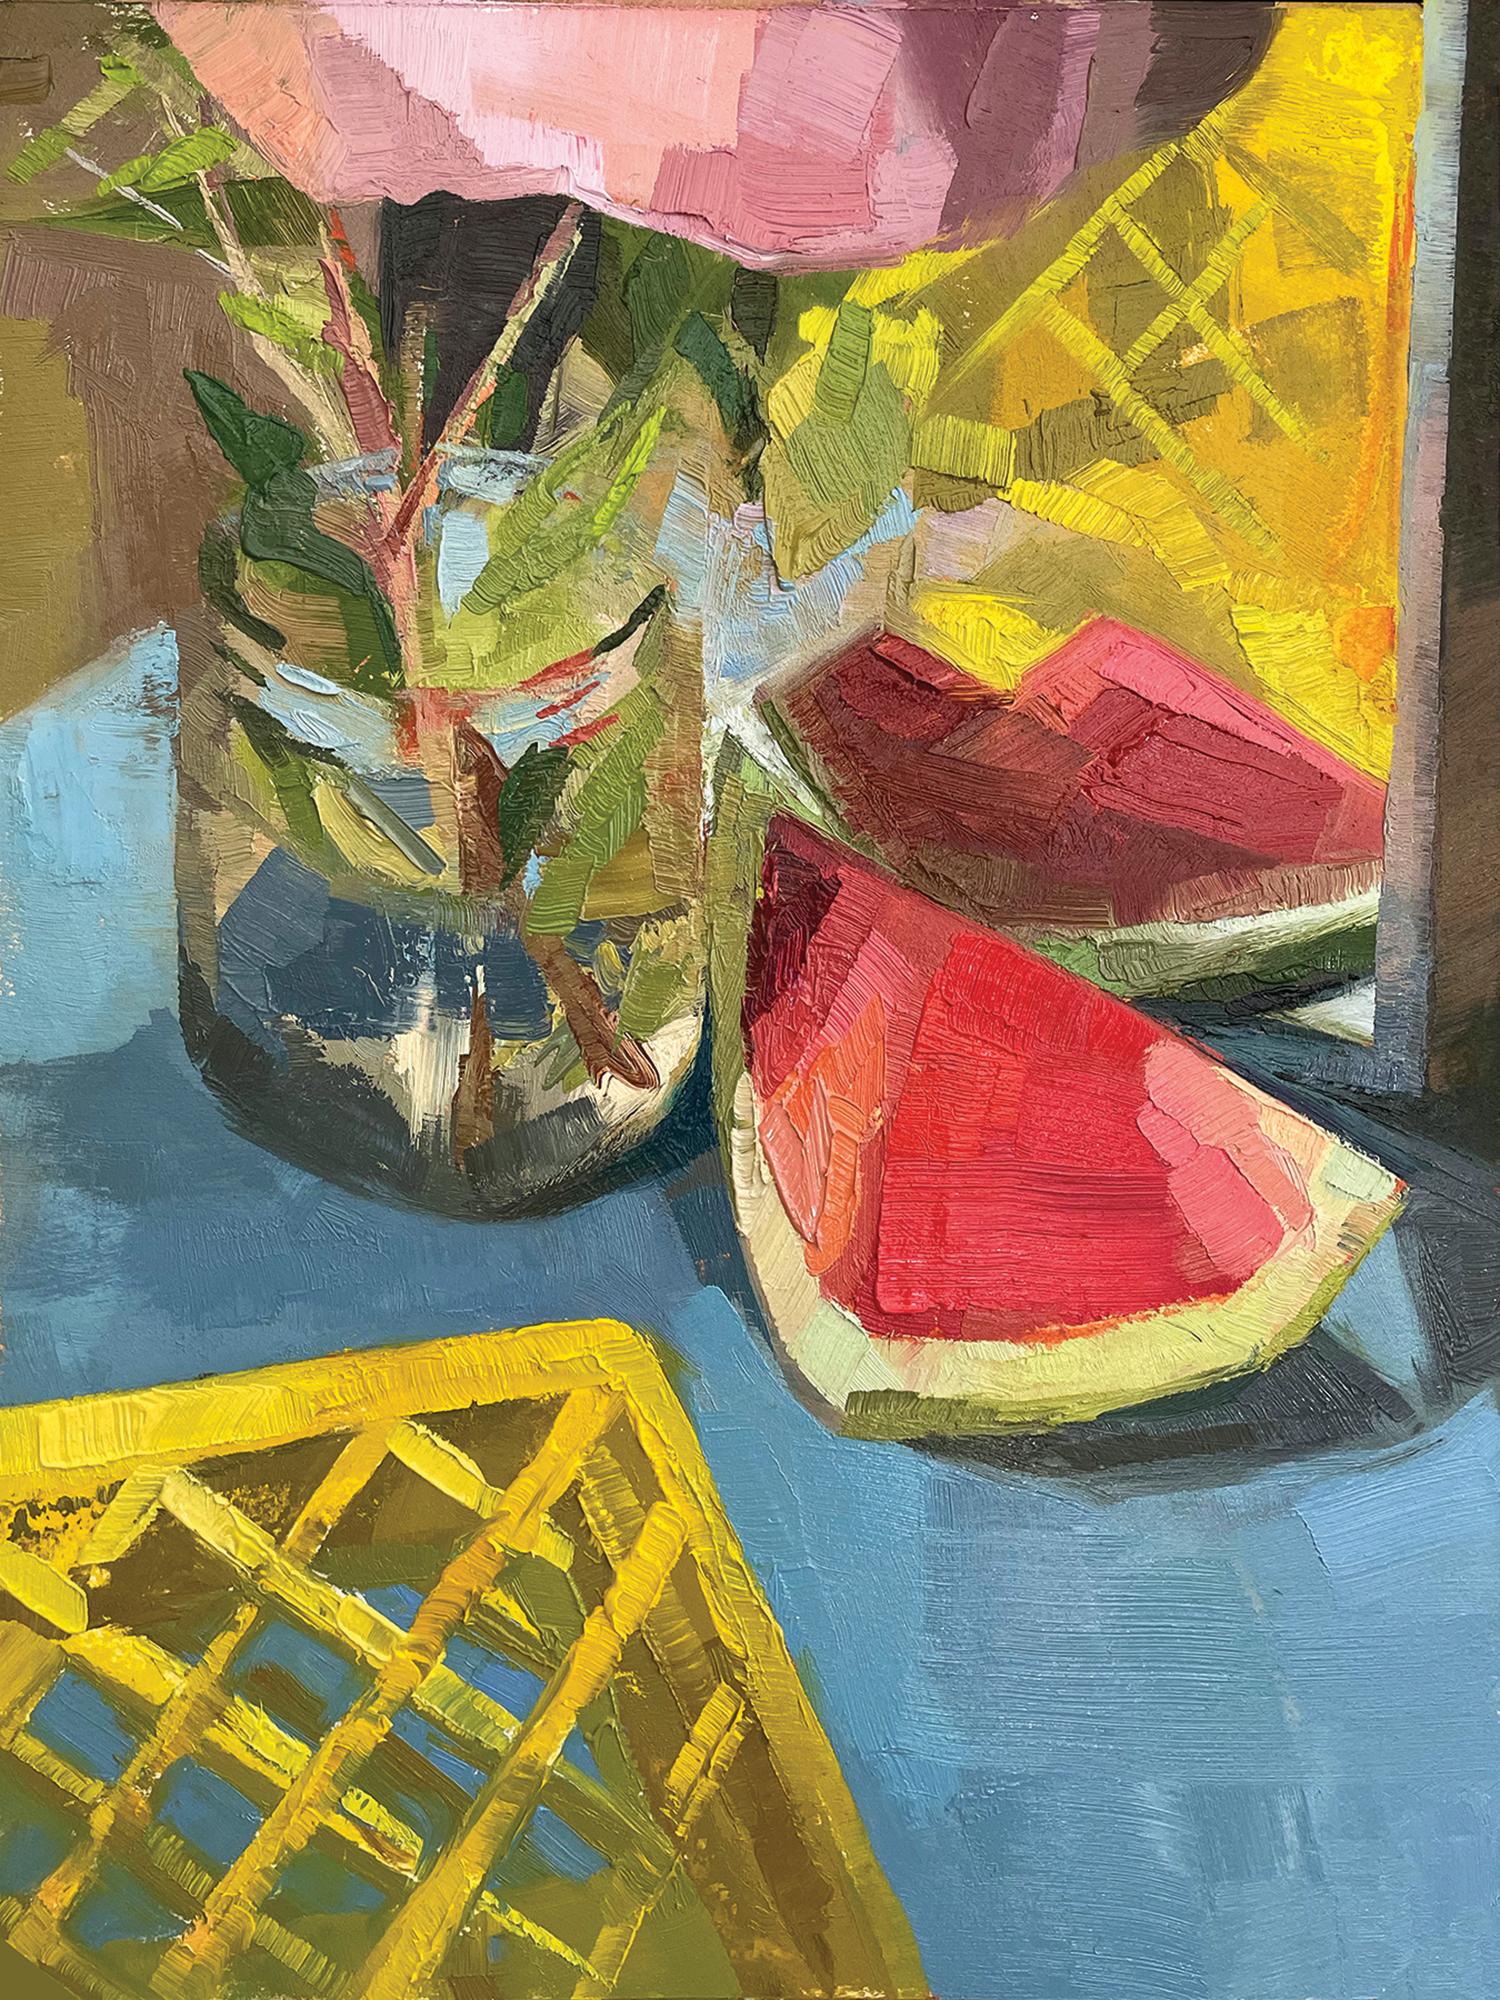 "Watermelon", Oil Painting